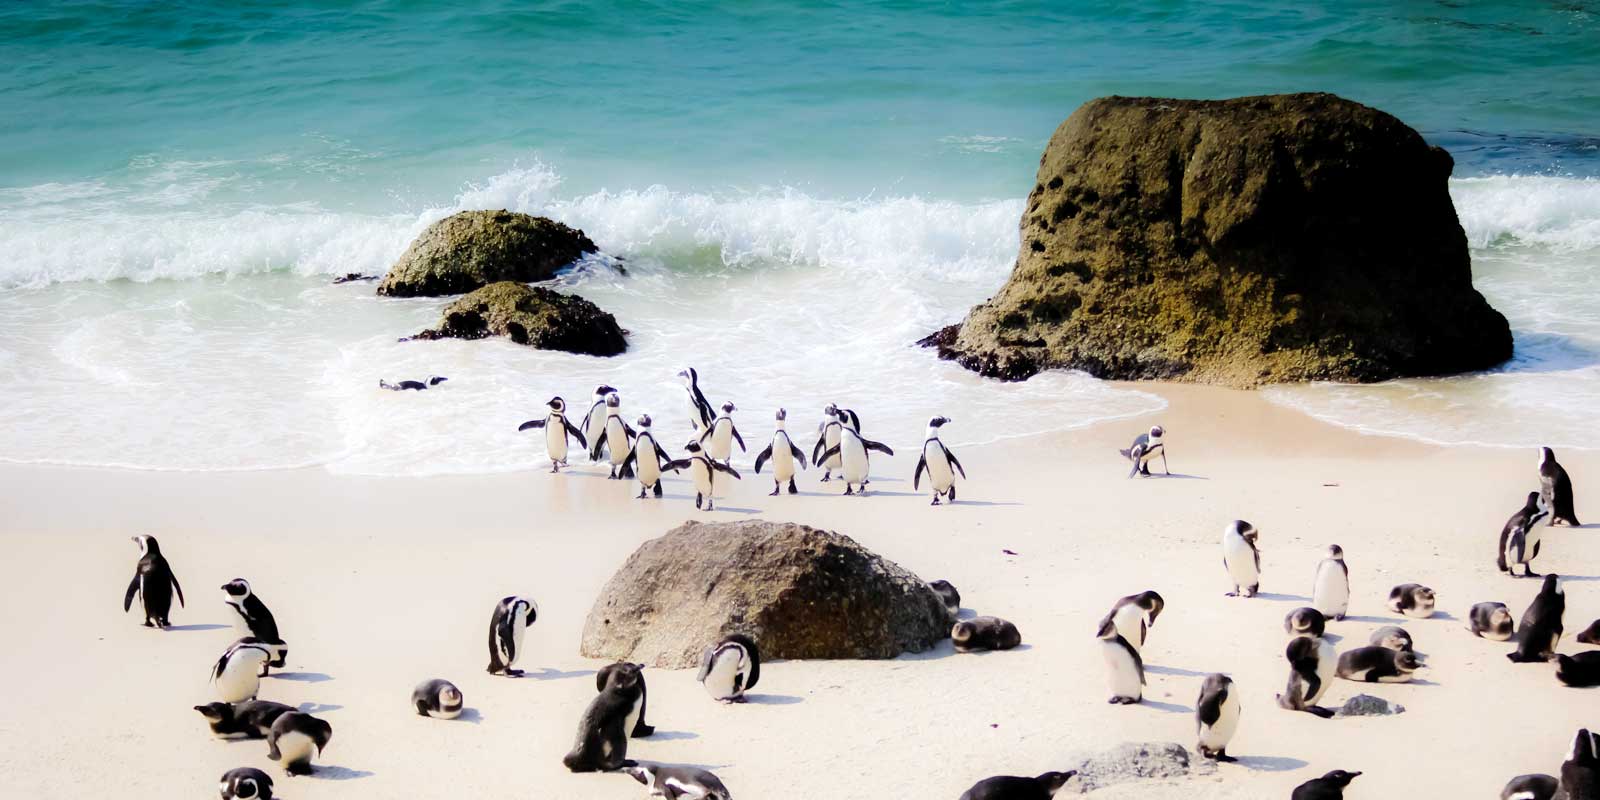 Explore South Africa, from the penguin filled beaches of Cape Town to vineyards of Stellenbosch.